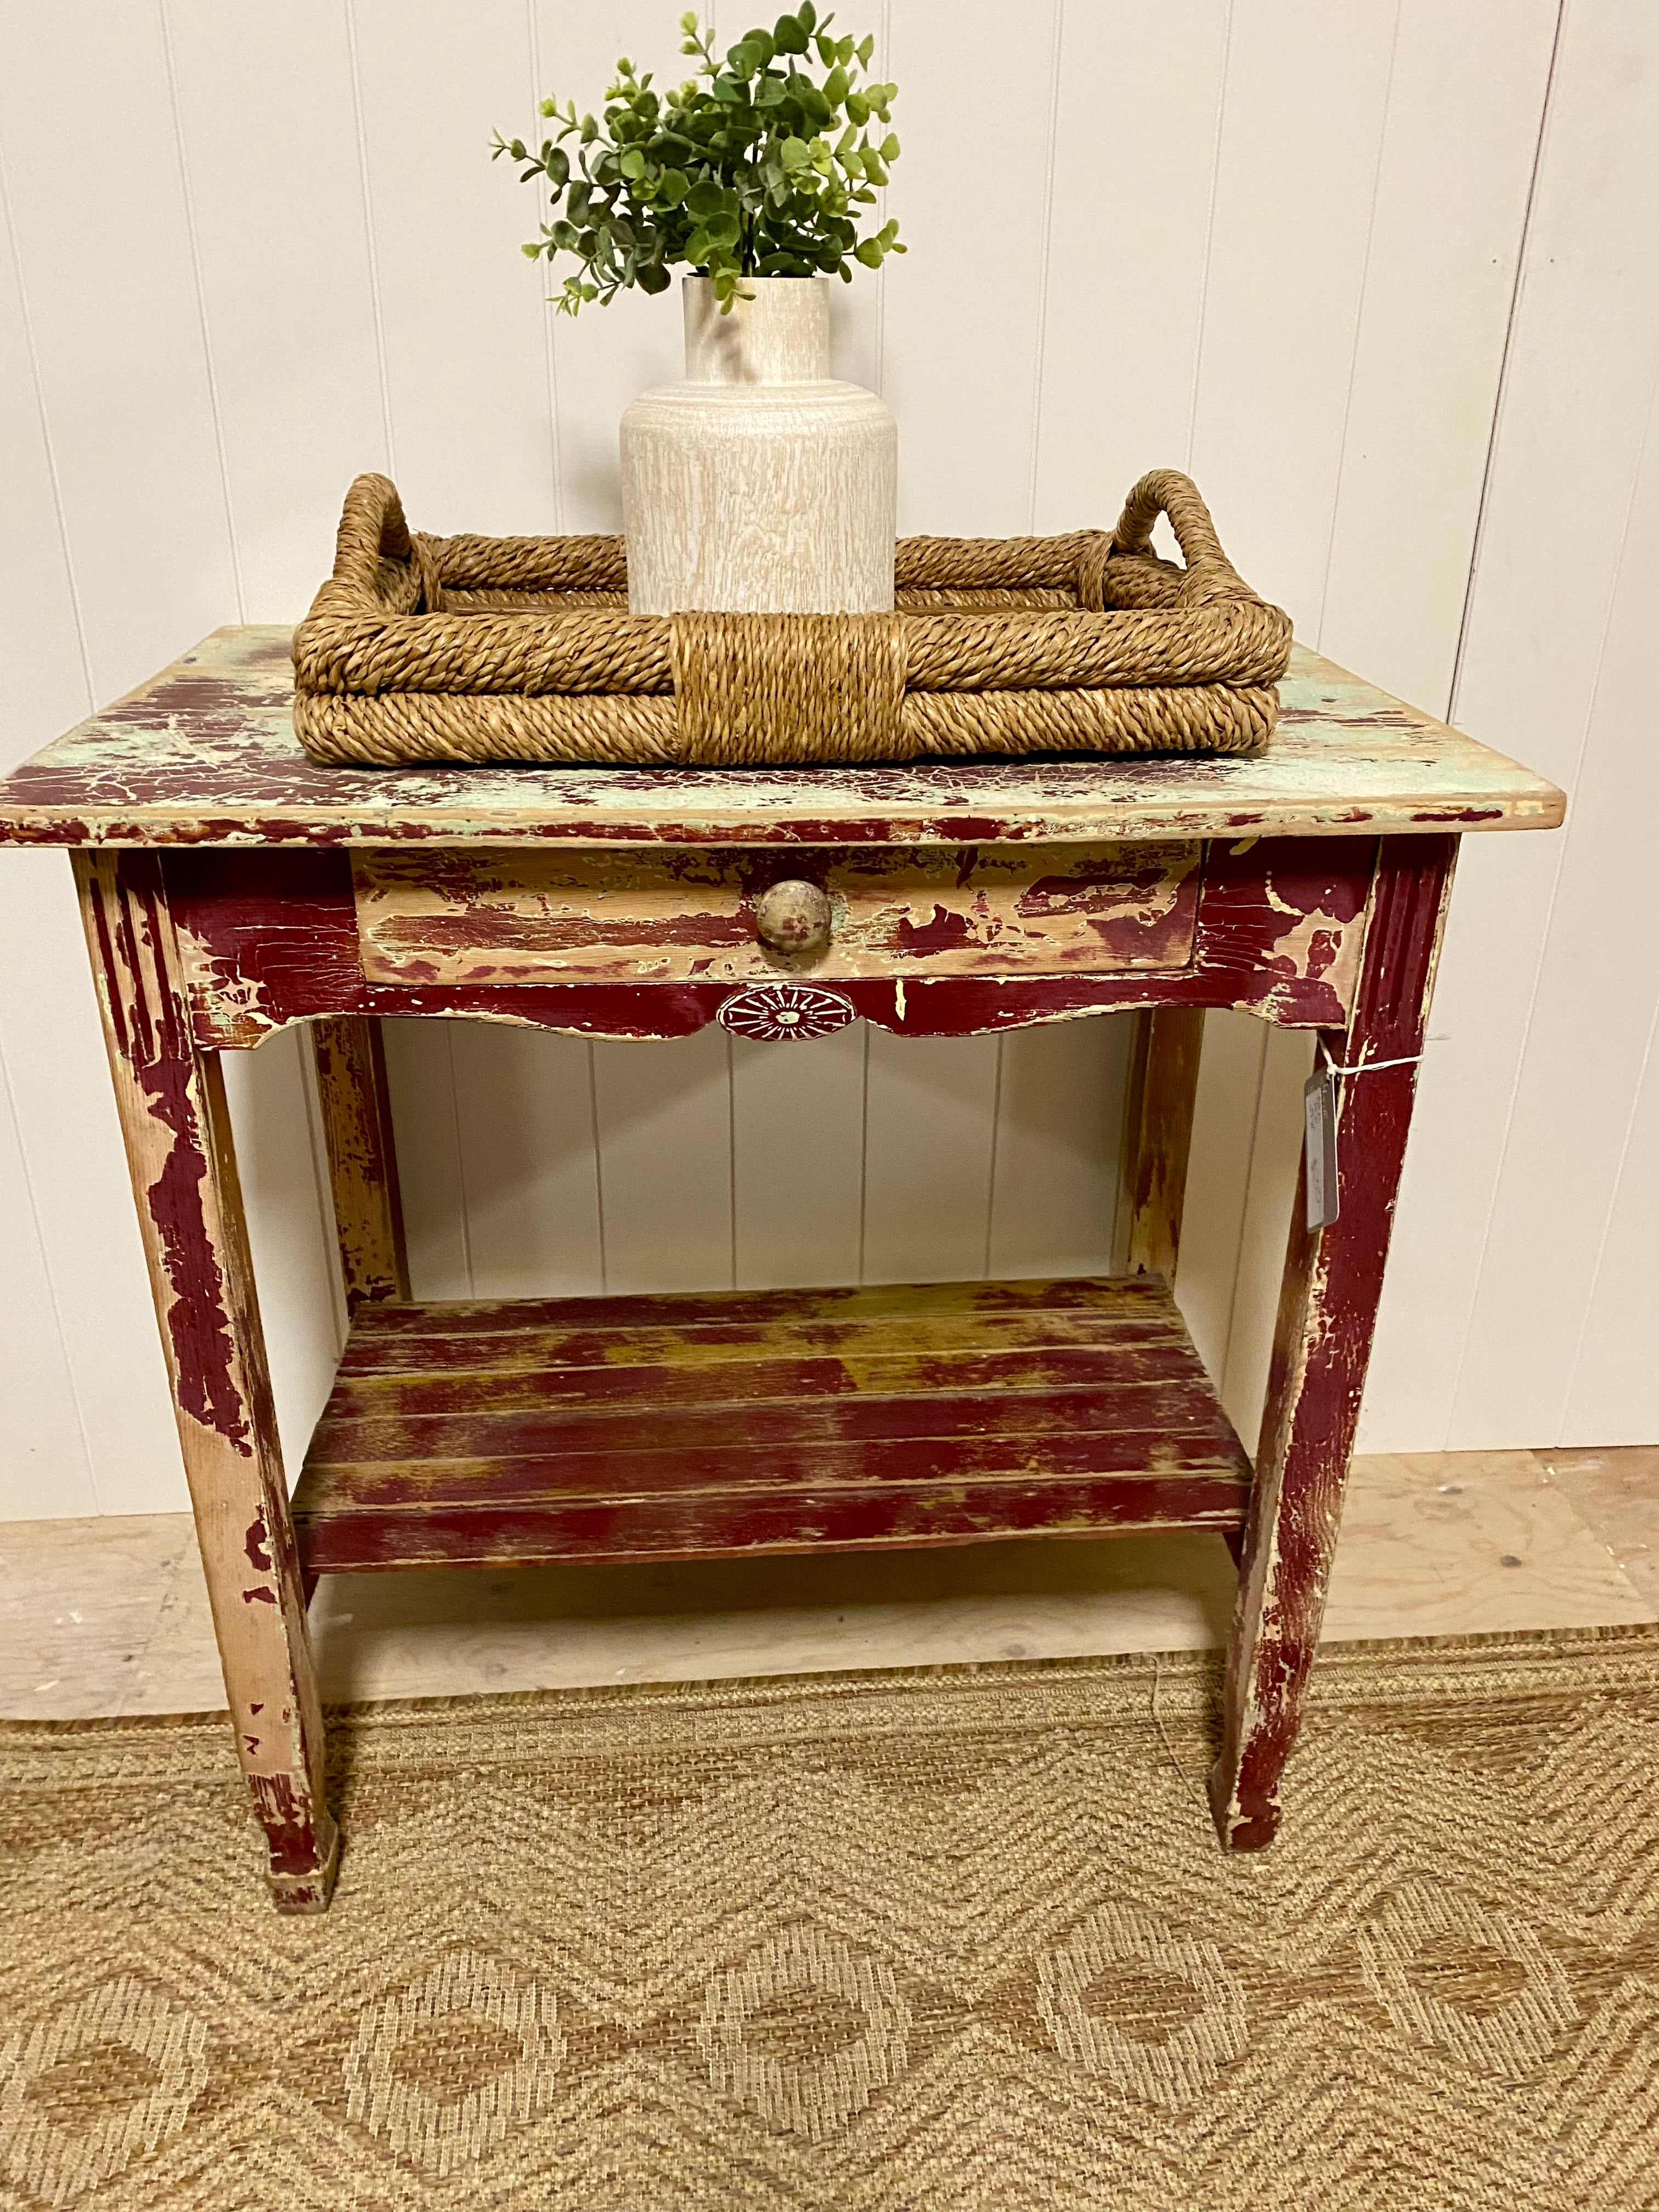 Gorgeous Unique Vintage Painted Chippy Accent Table or small entry table